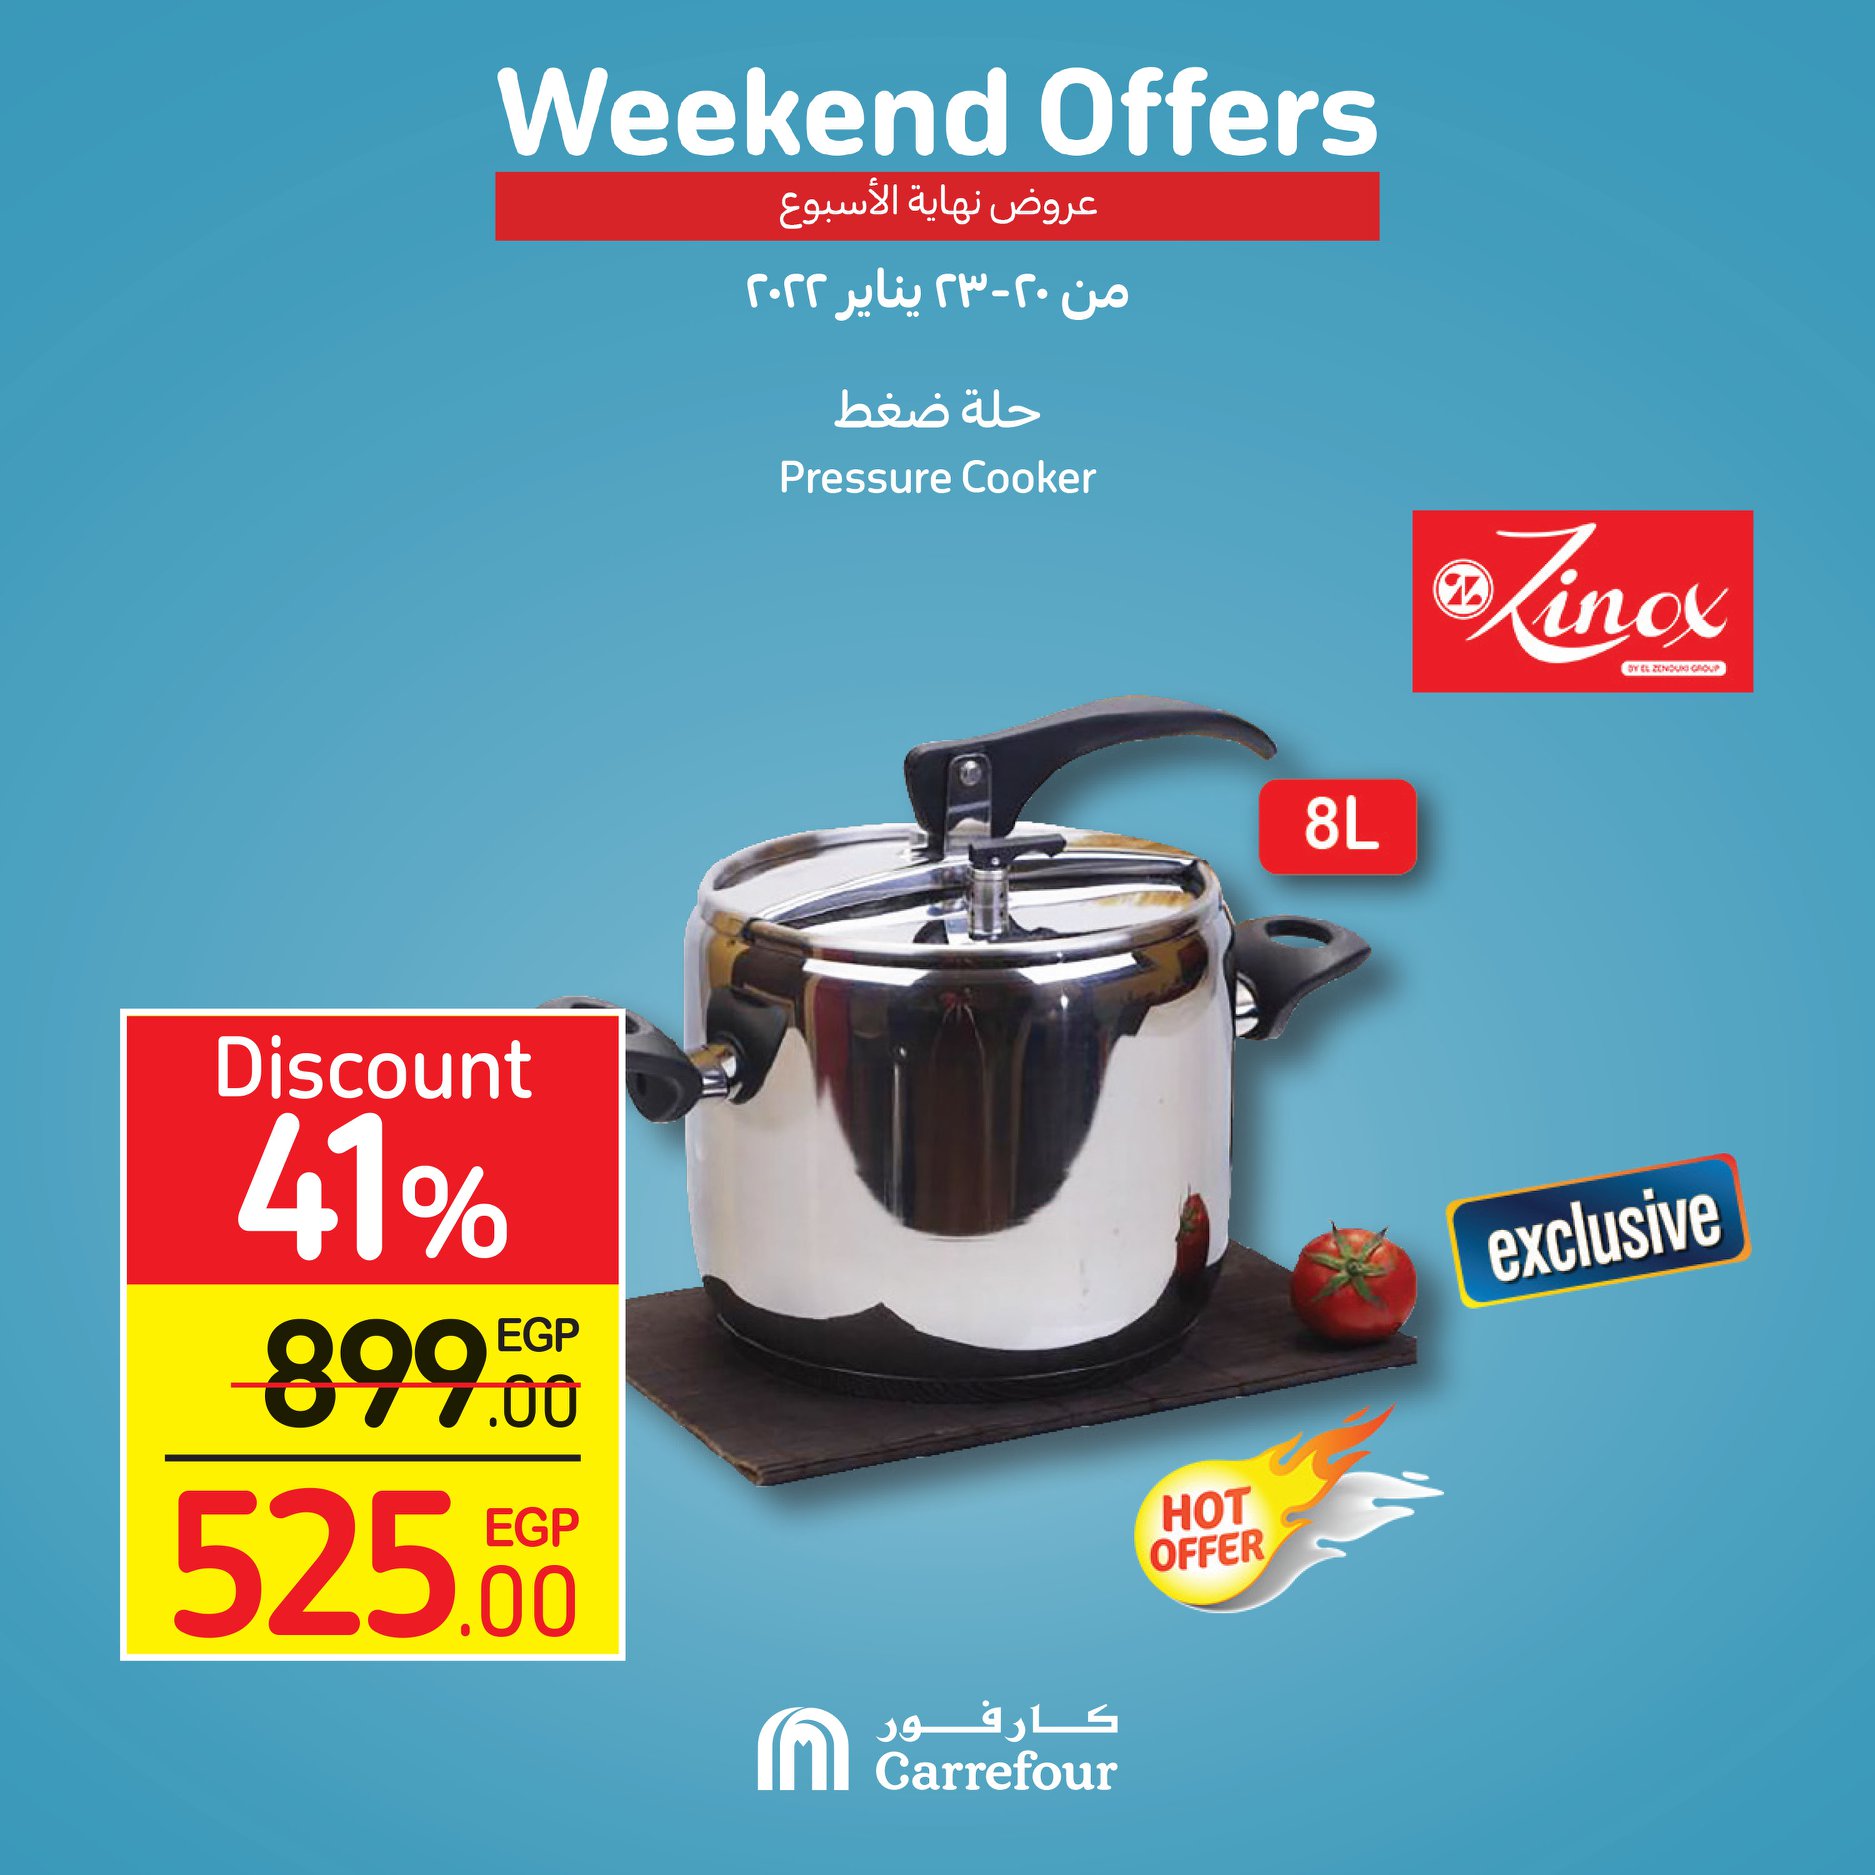 Watch Carrefour's gifts and surprises at Weekend and dirt cheap prices 19